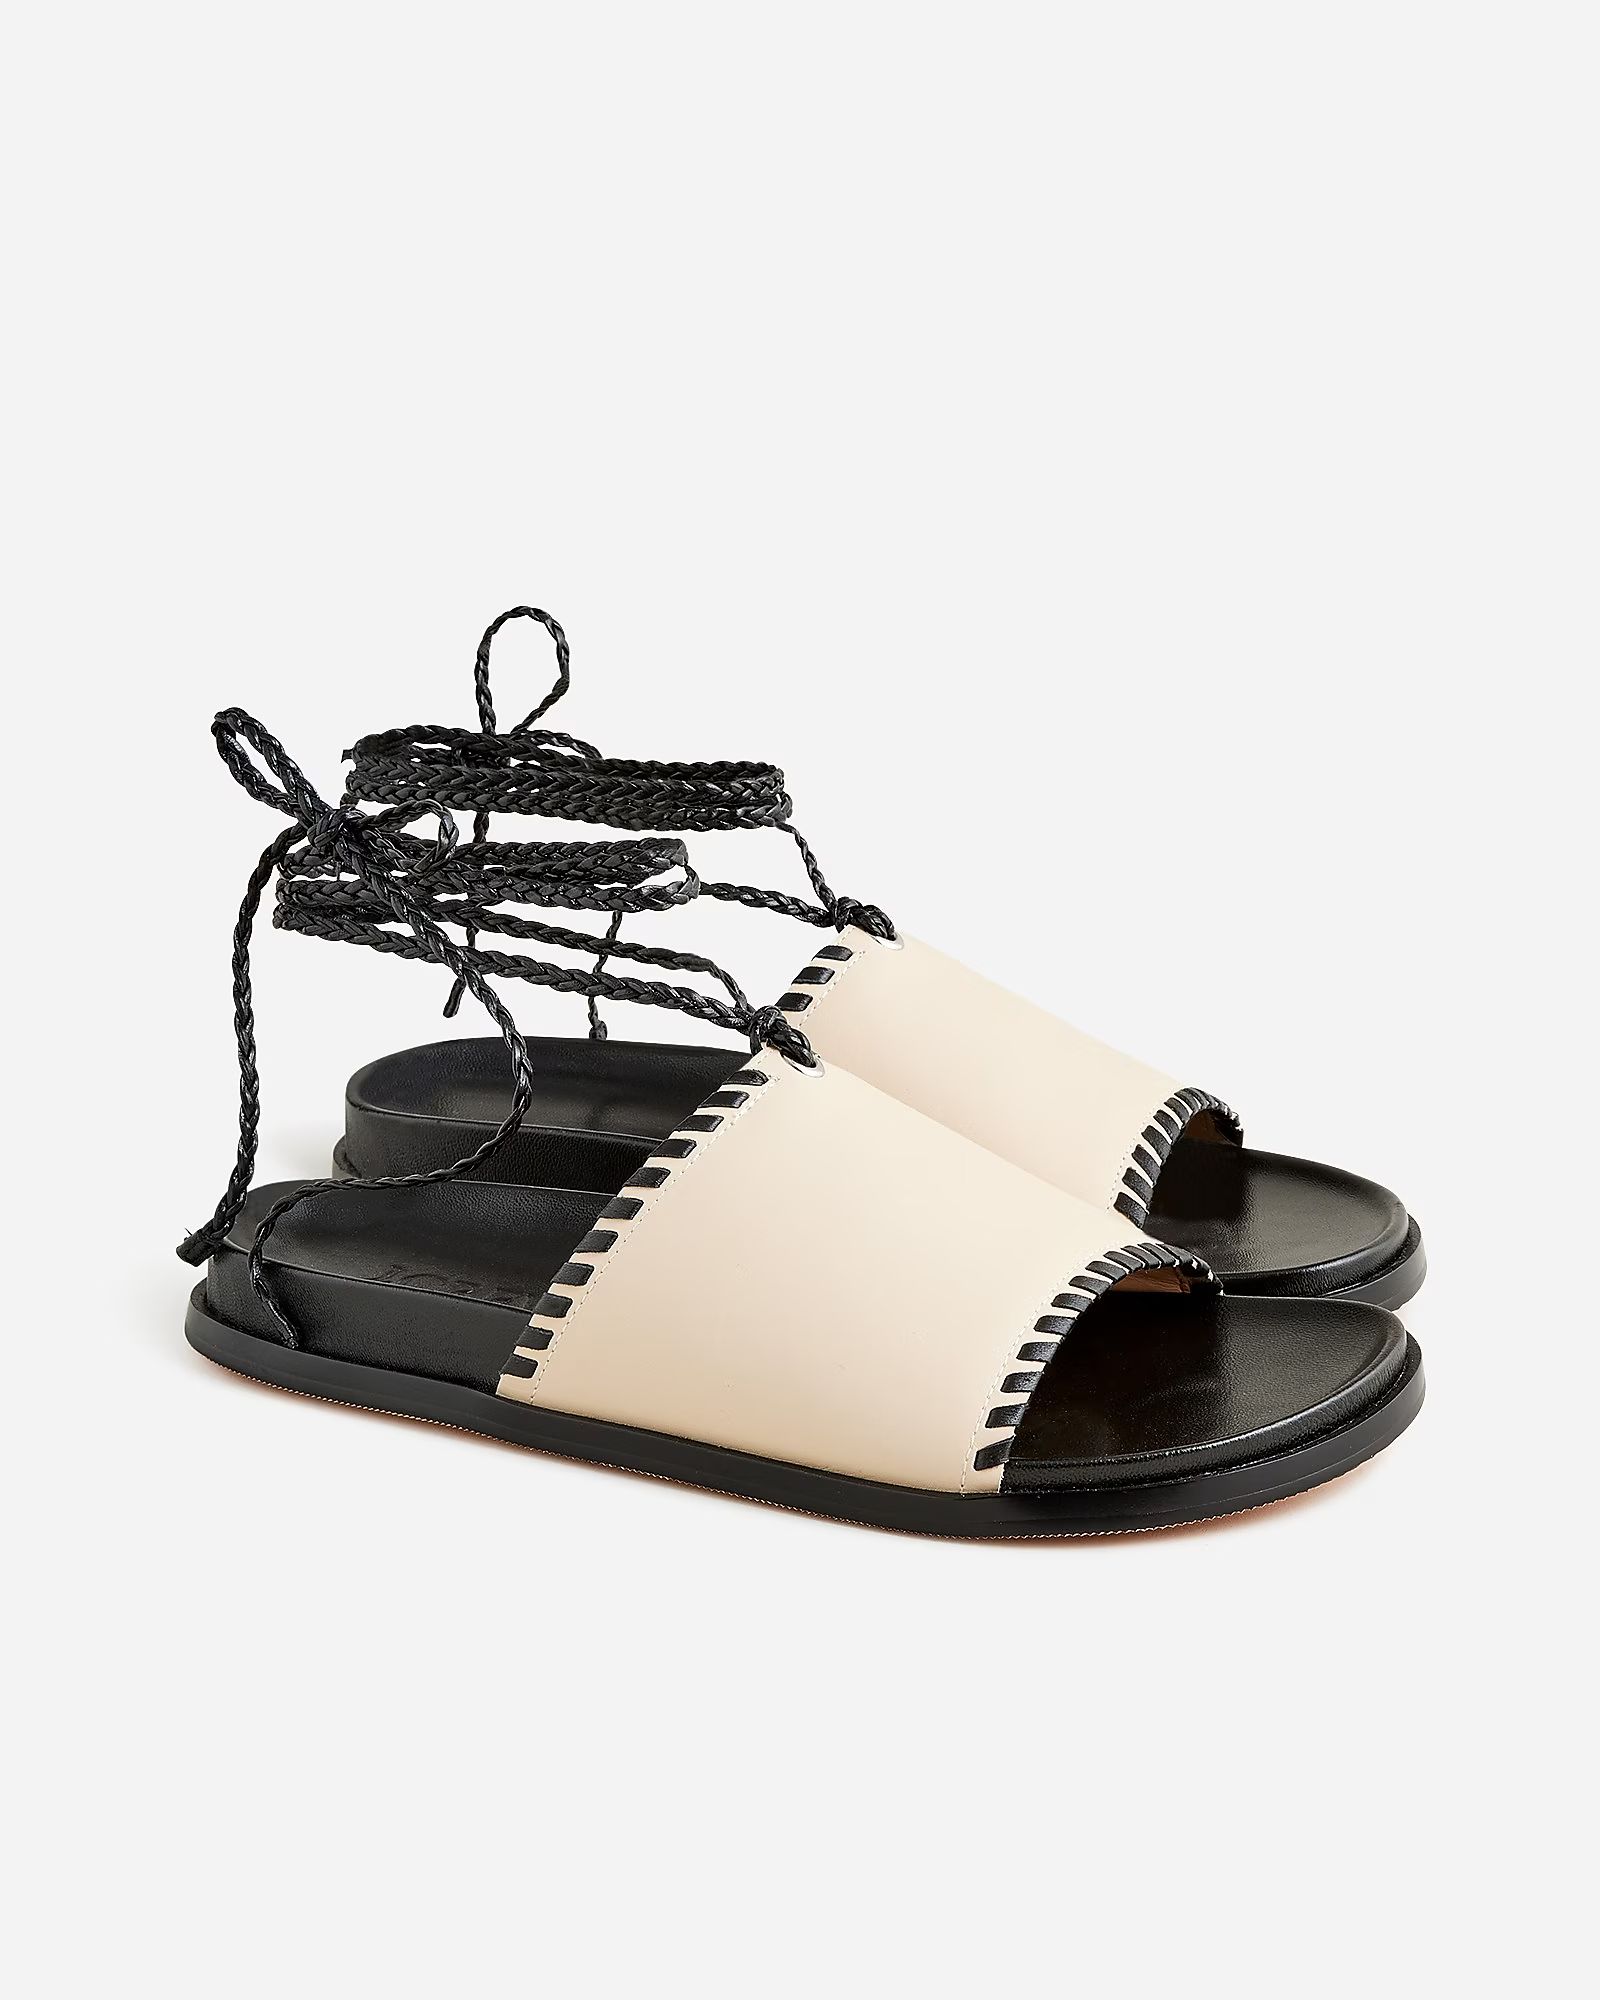 Colbie braided lace-up sandals in leather | J.Crew US